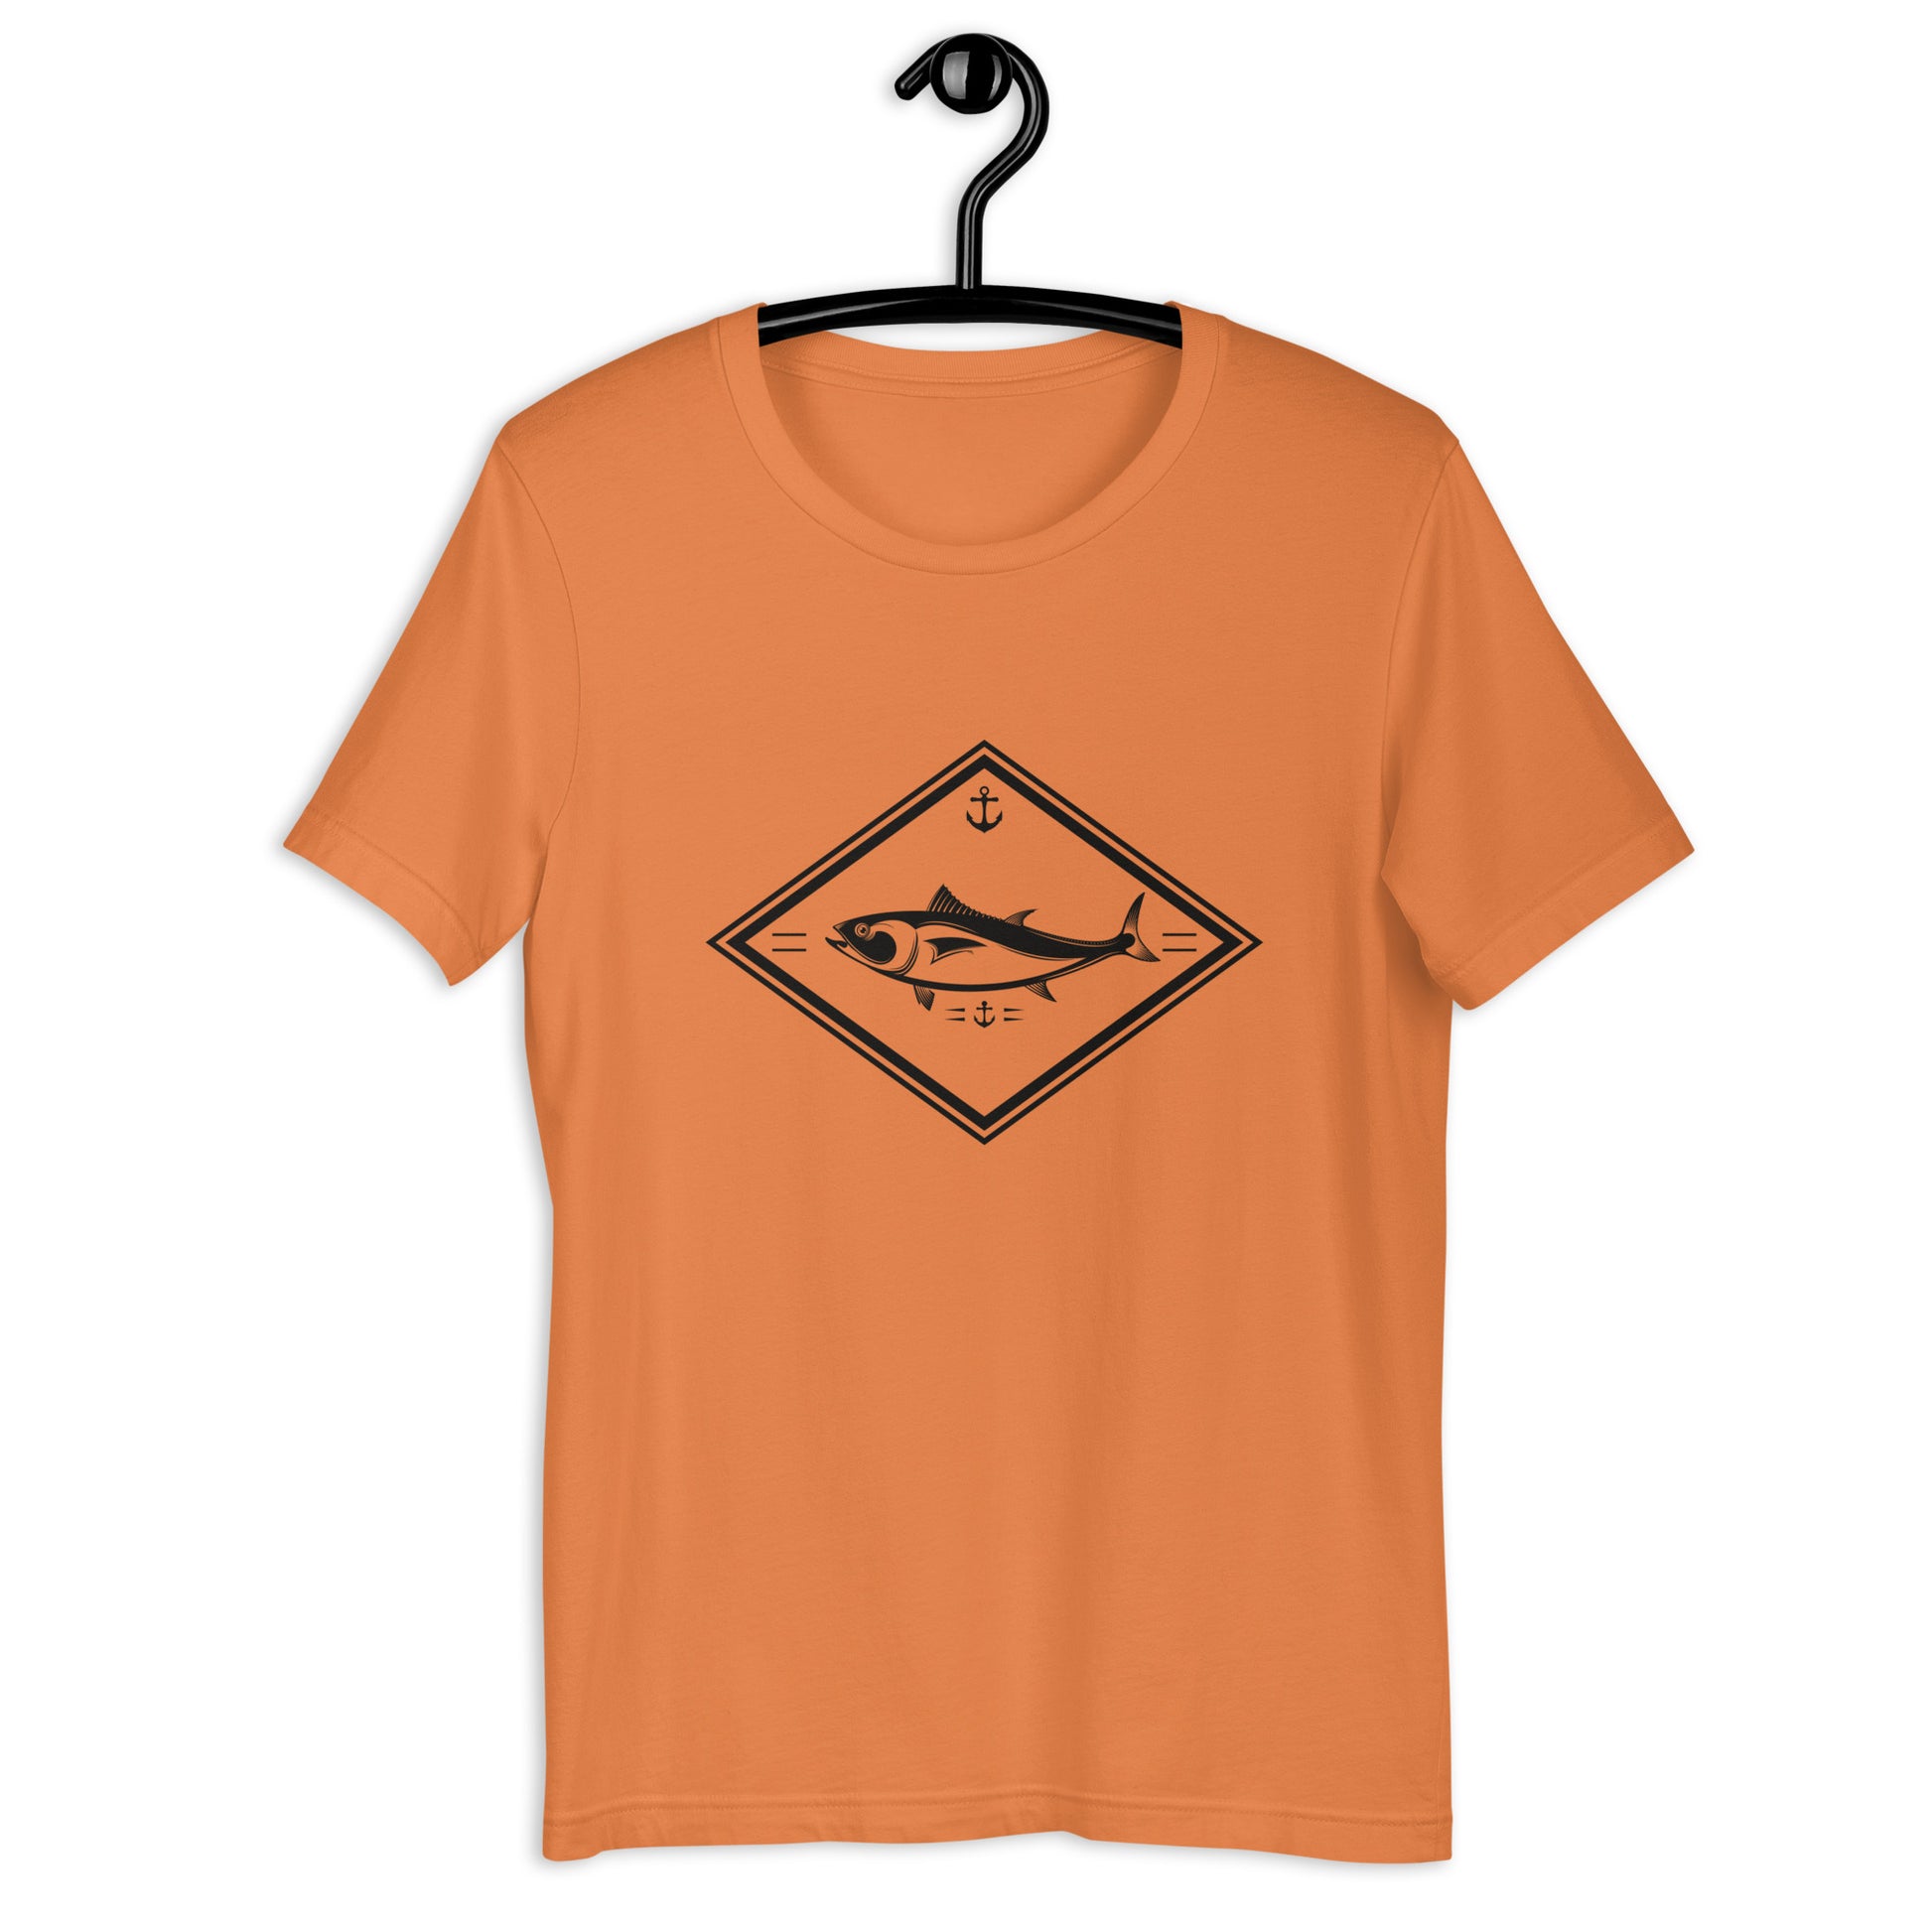 "Fisherman" T-Shirt - Weave Got Gifts - Unique Gifts You Won’t Find Anywhere Else!